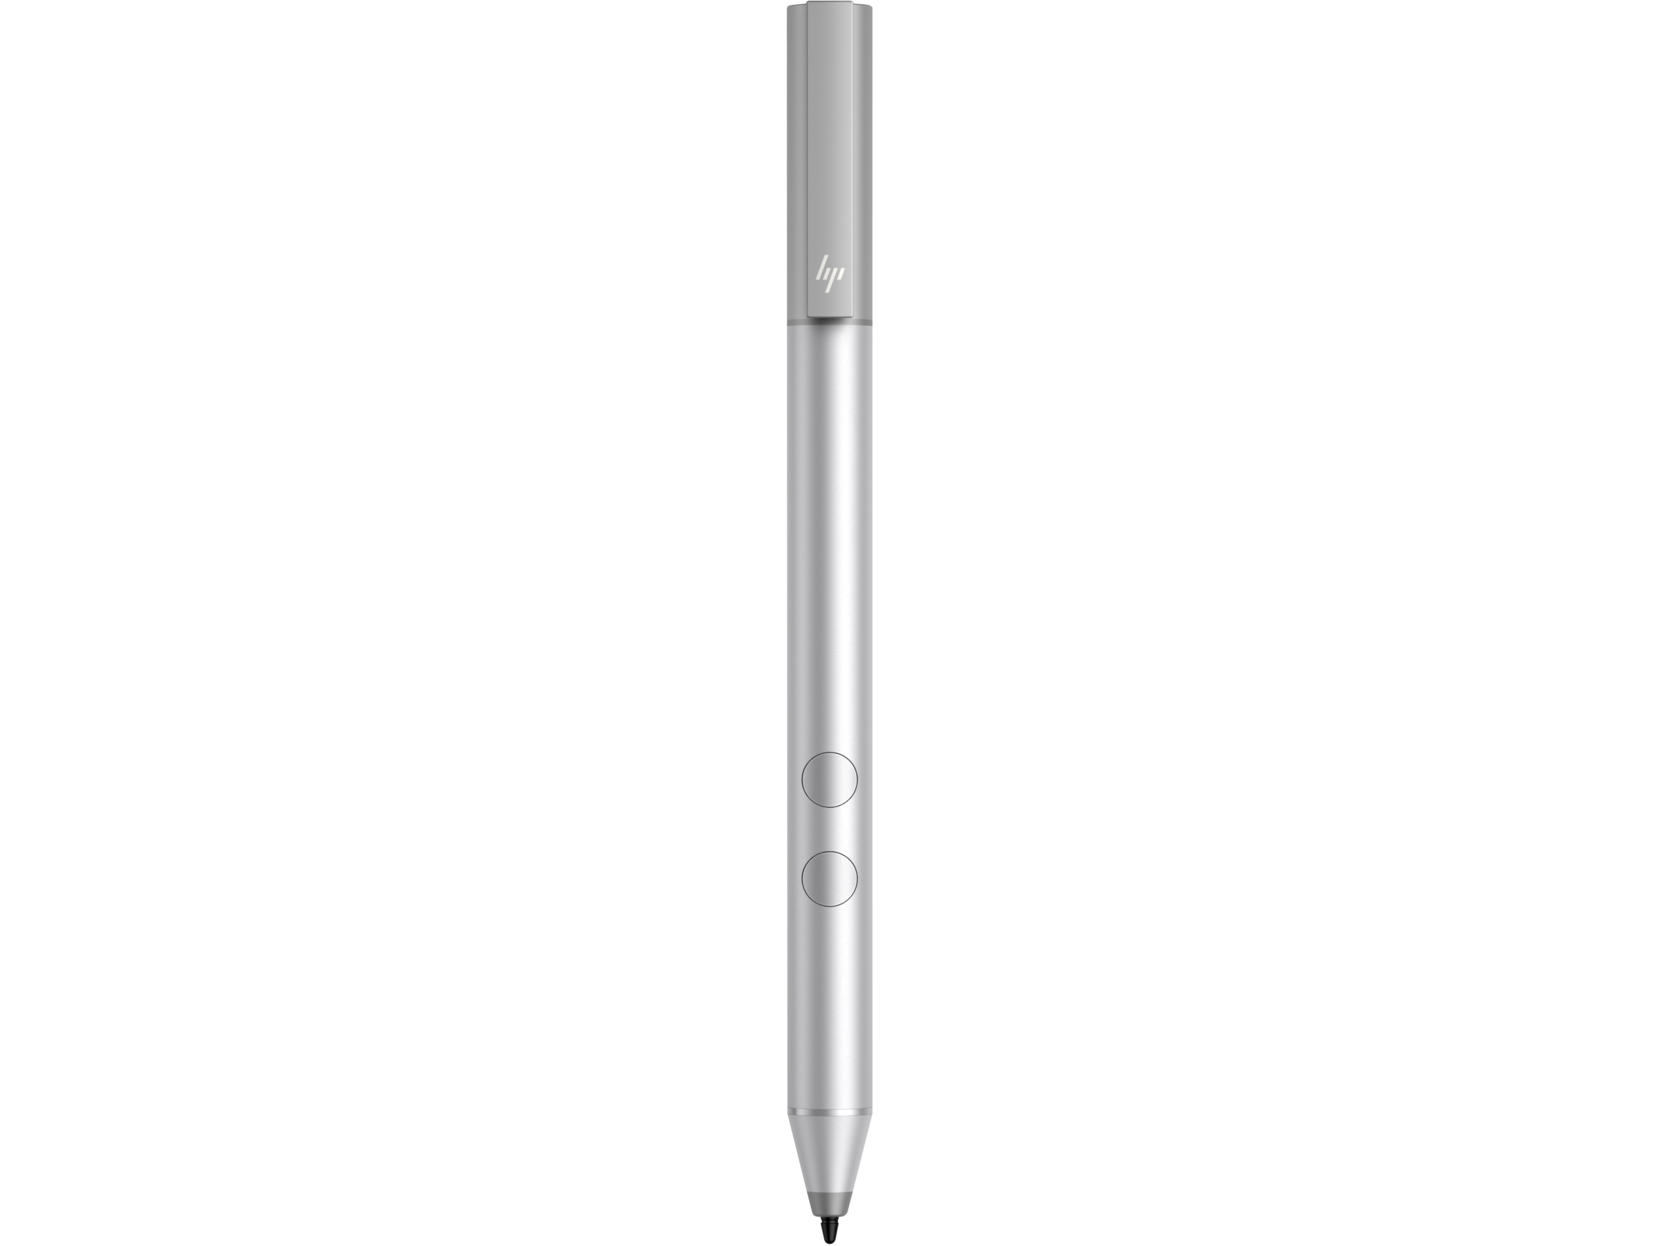 HP Digital Pen for Touch Screens